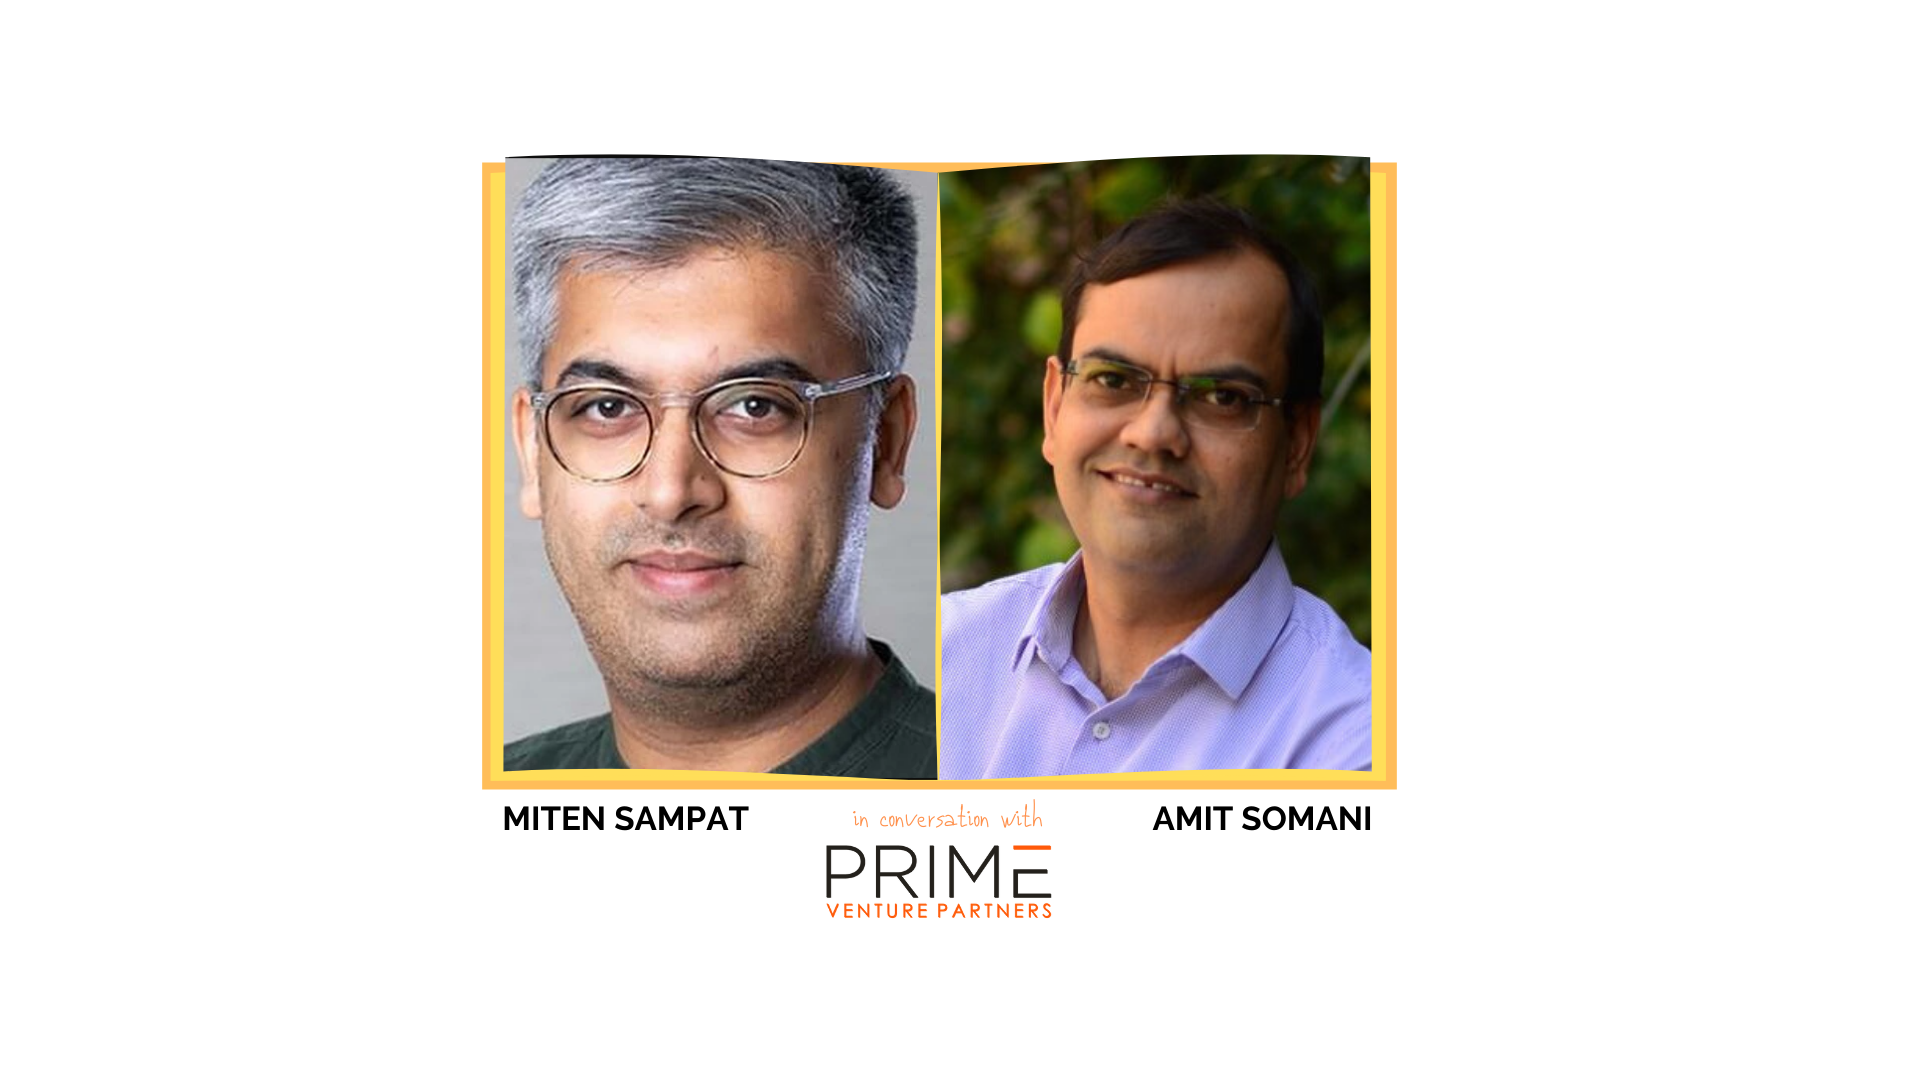 A graphic with guest(Miten Sampat) and host's (Amit Somani) name and image.